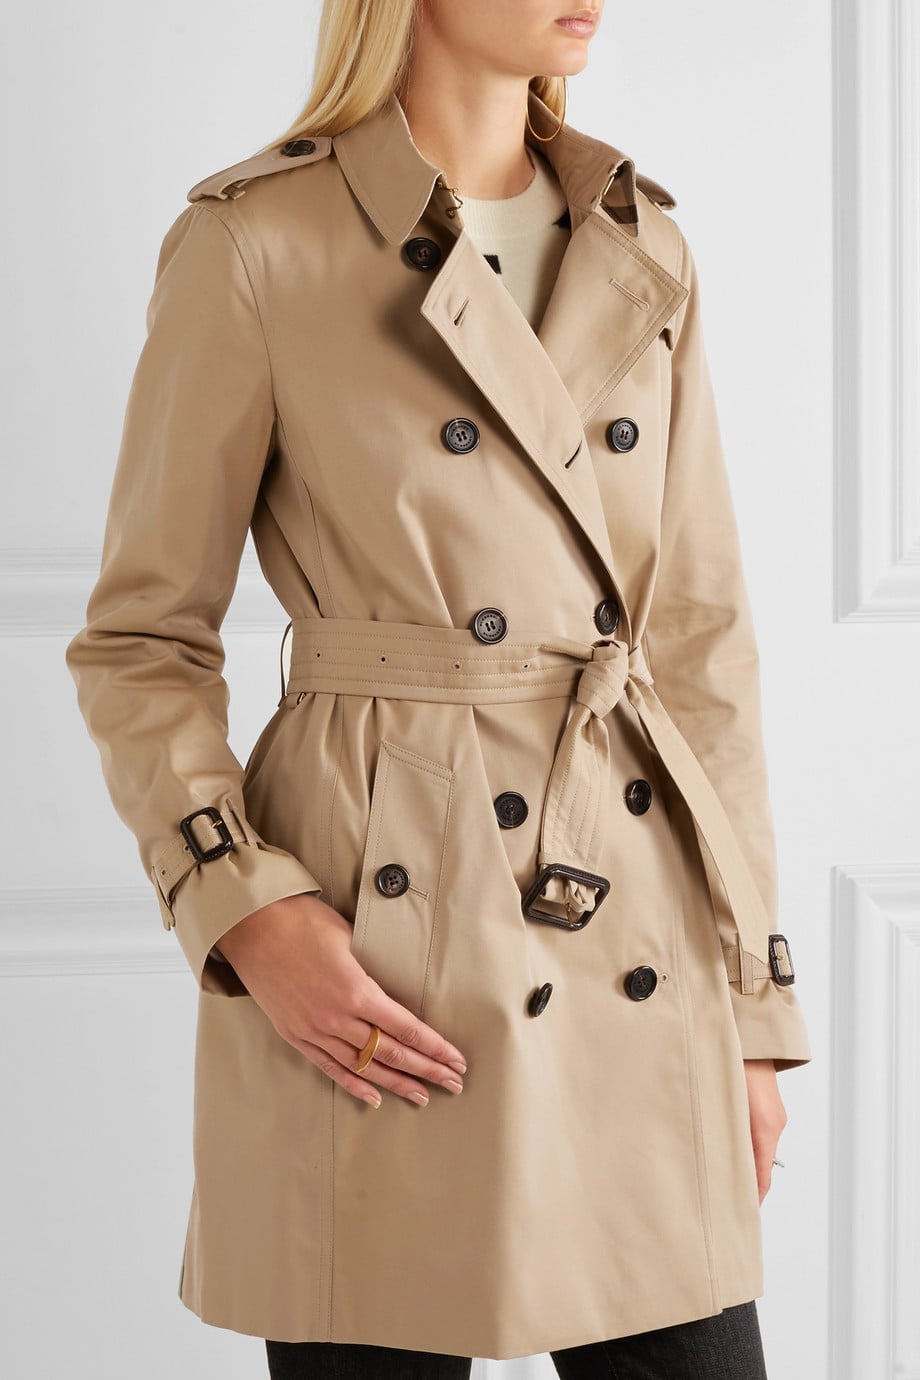 Burberry Kensington Trench Coat | 11 Essential Fashion Pieces That Are  Totally Worth the Investment | POPSUGAR Fashion Photo 4